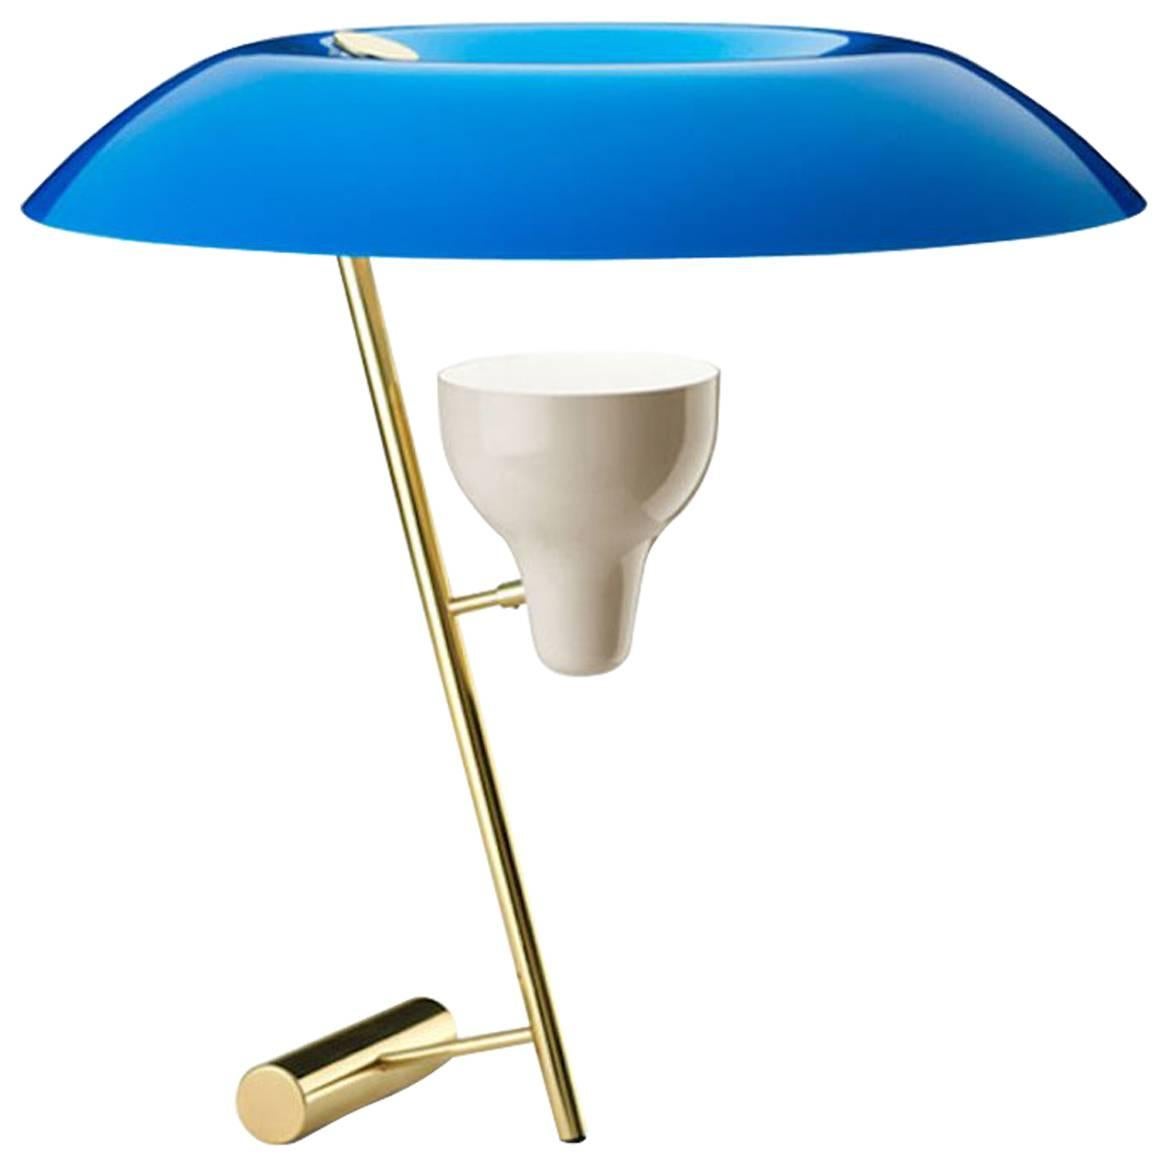 Model 548 Dimmable Table Lamp by Gino Sarfatti in Azure Blue and Polished Brass For Sale